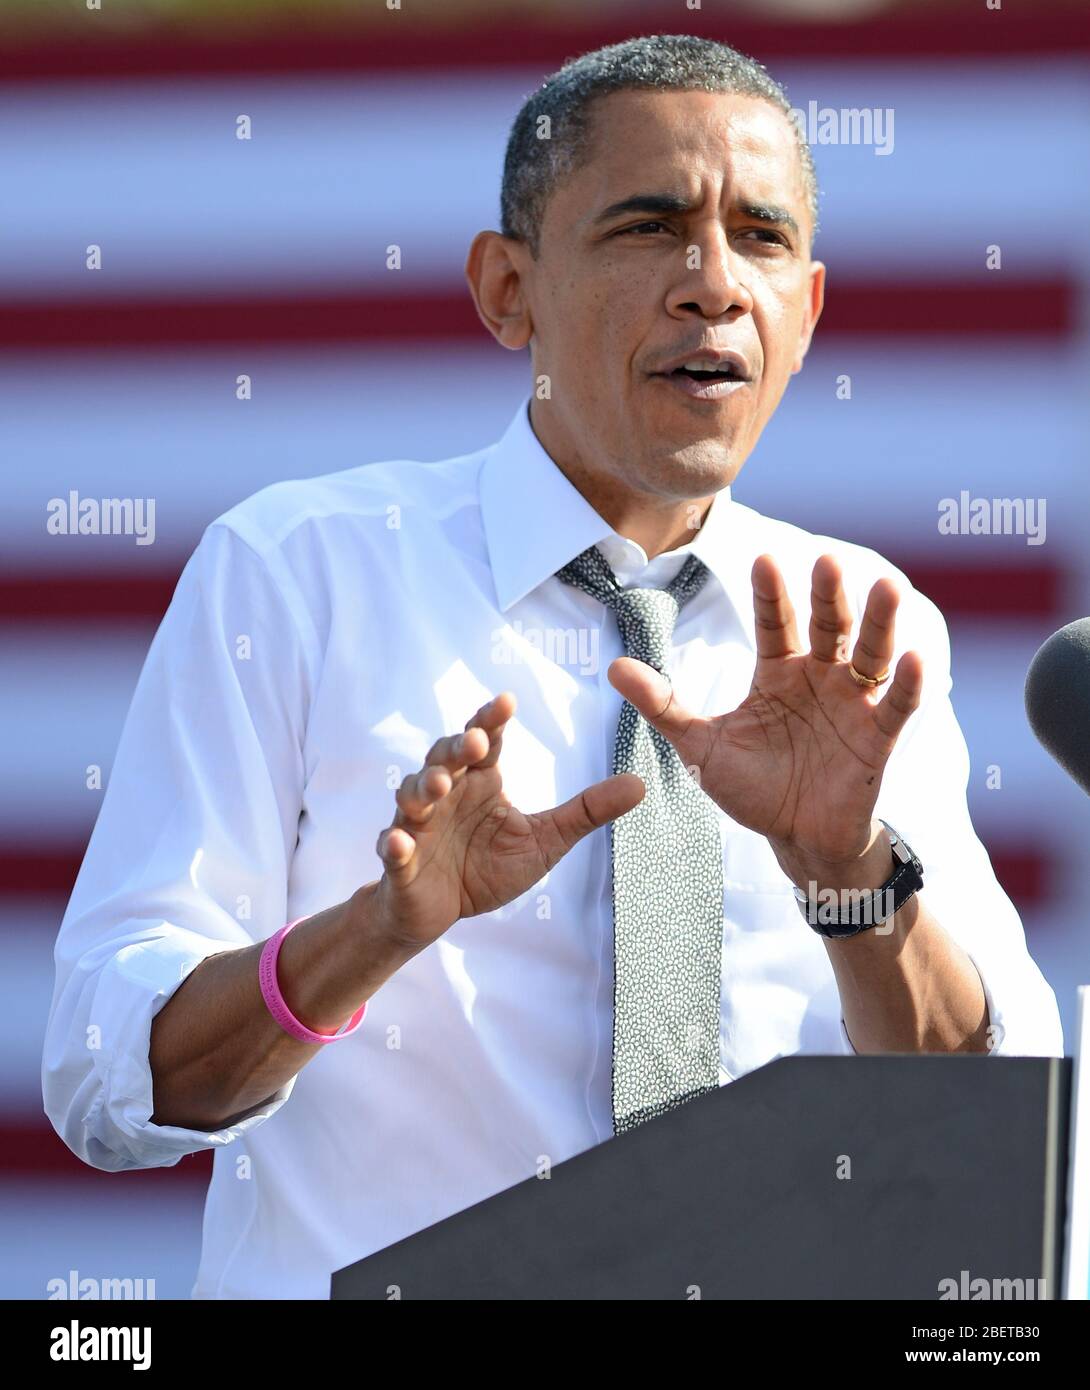 DELRAY BEACH FL- OCTOBER 23:  US President Barack Obama speaks during a Grassroots campaign event at Delray Beach Tennis Center on October 23, 2012 in Stock Photo